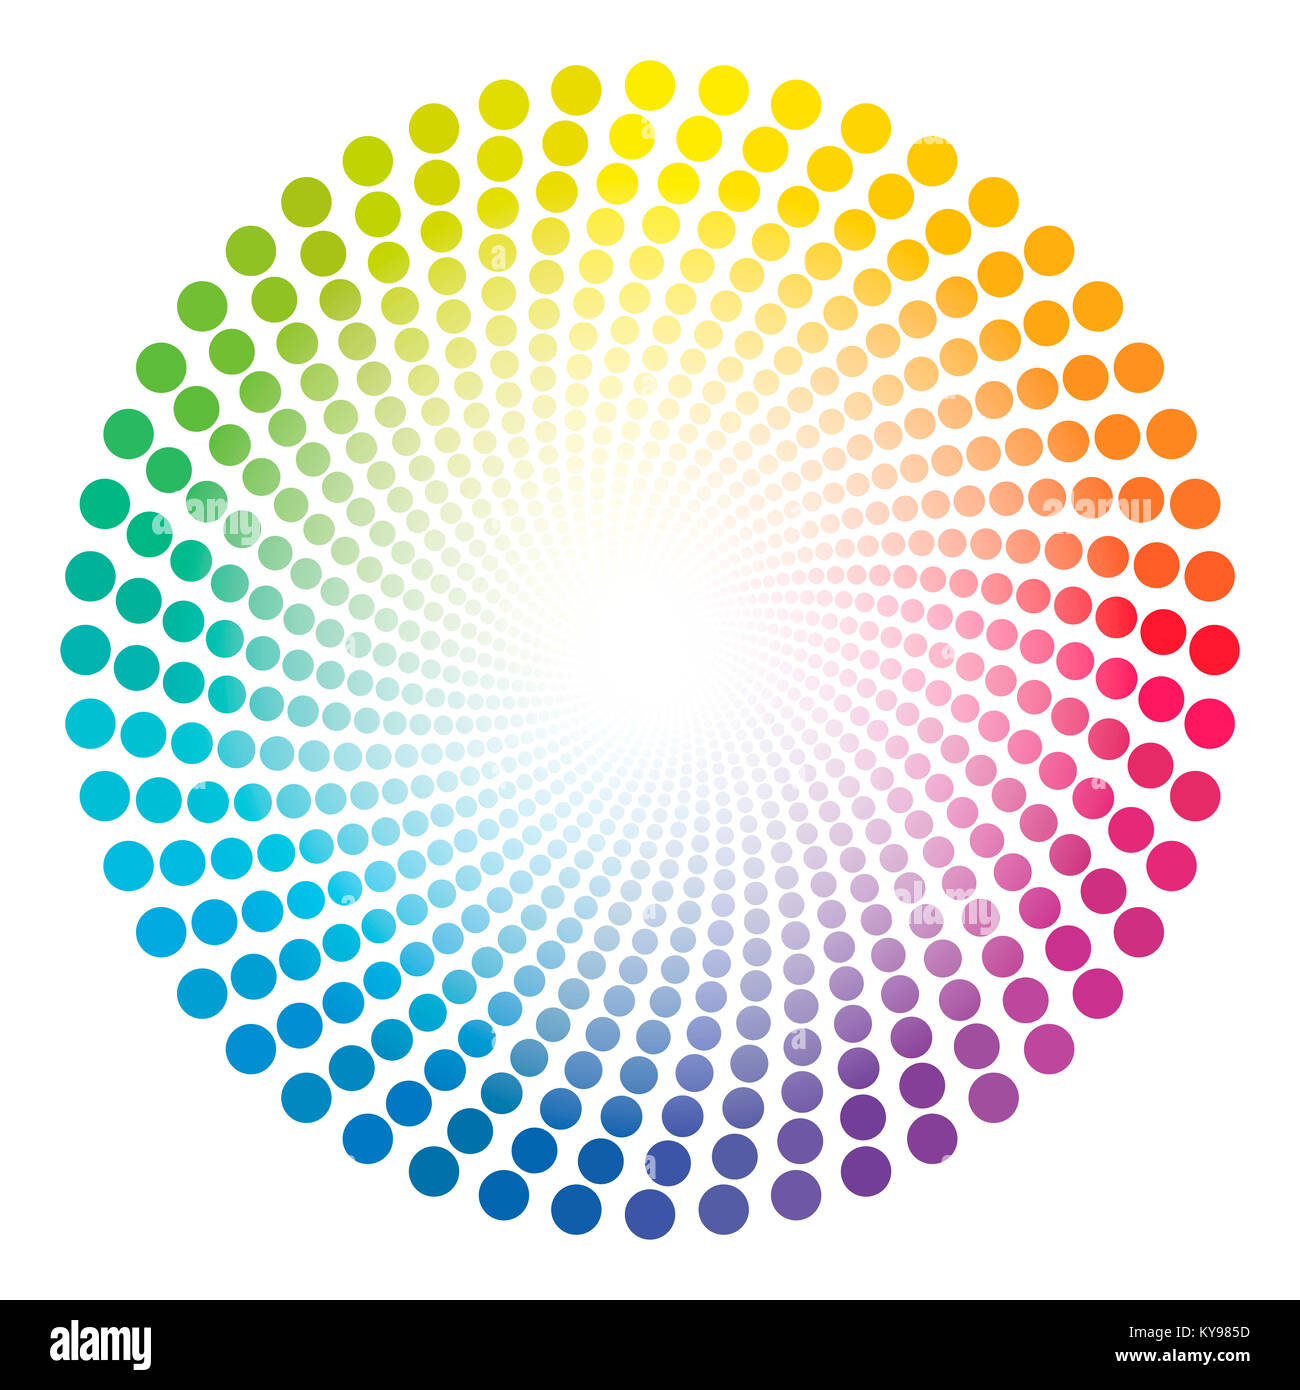 Spiral dots tube pattern - rainbow colored twisted circle illustration with white shining glowing center. Stock Photo